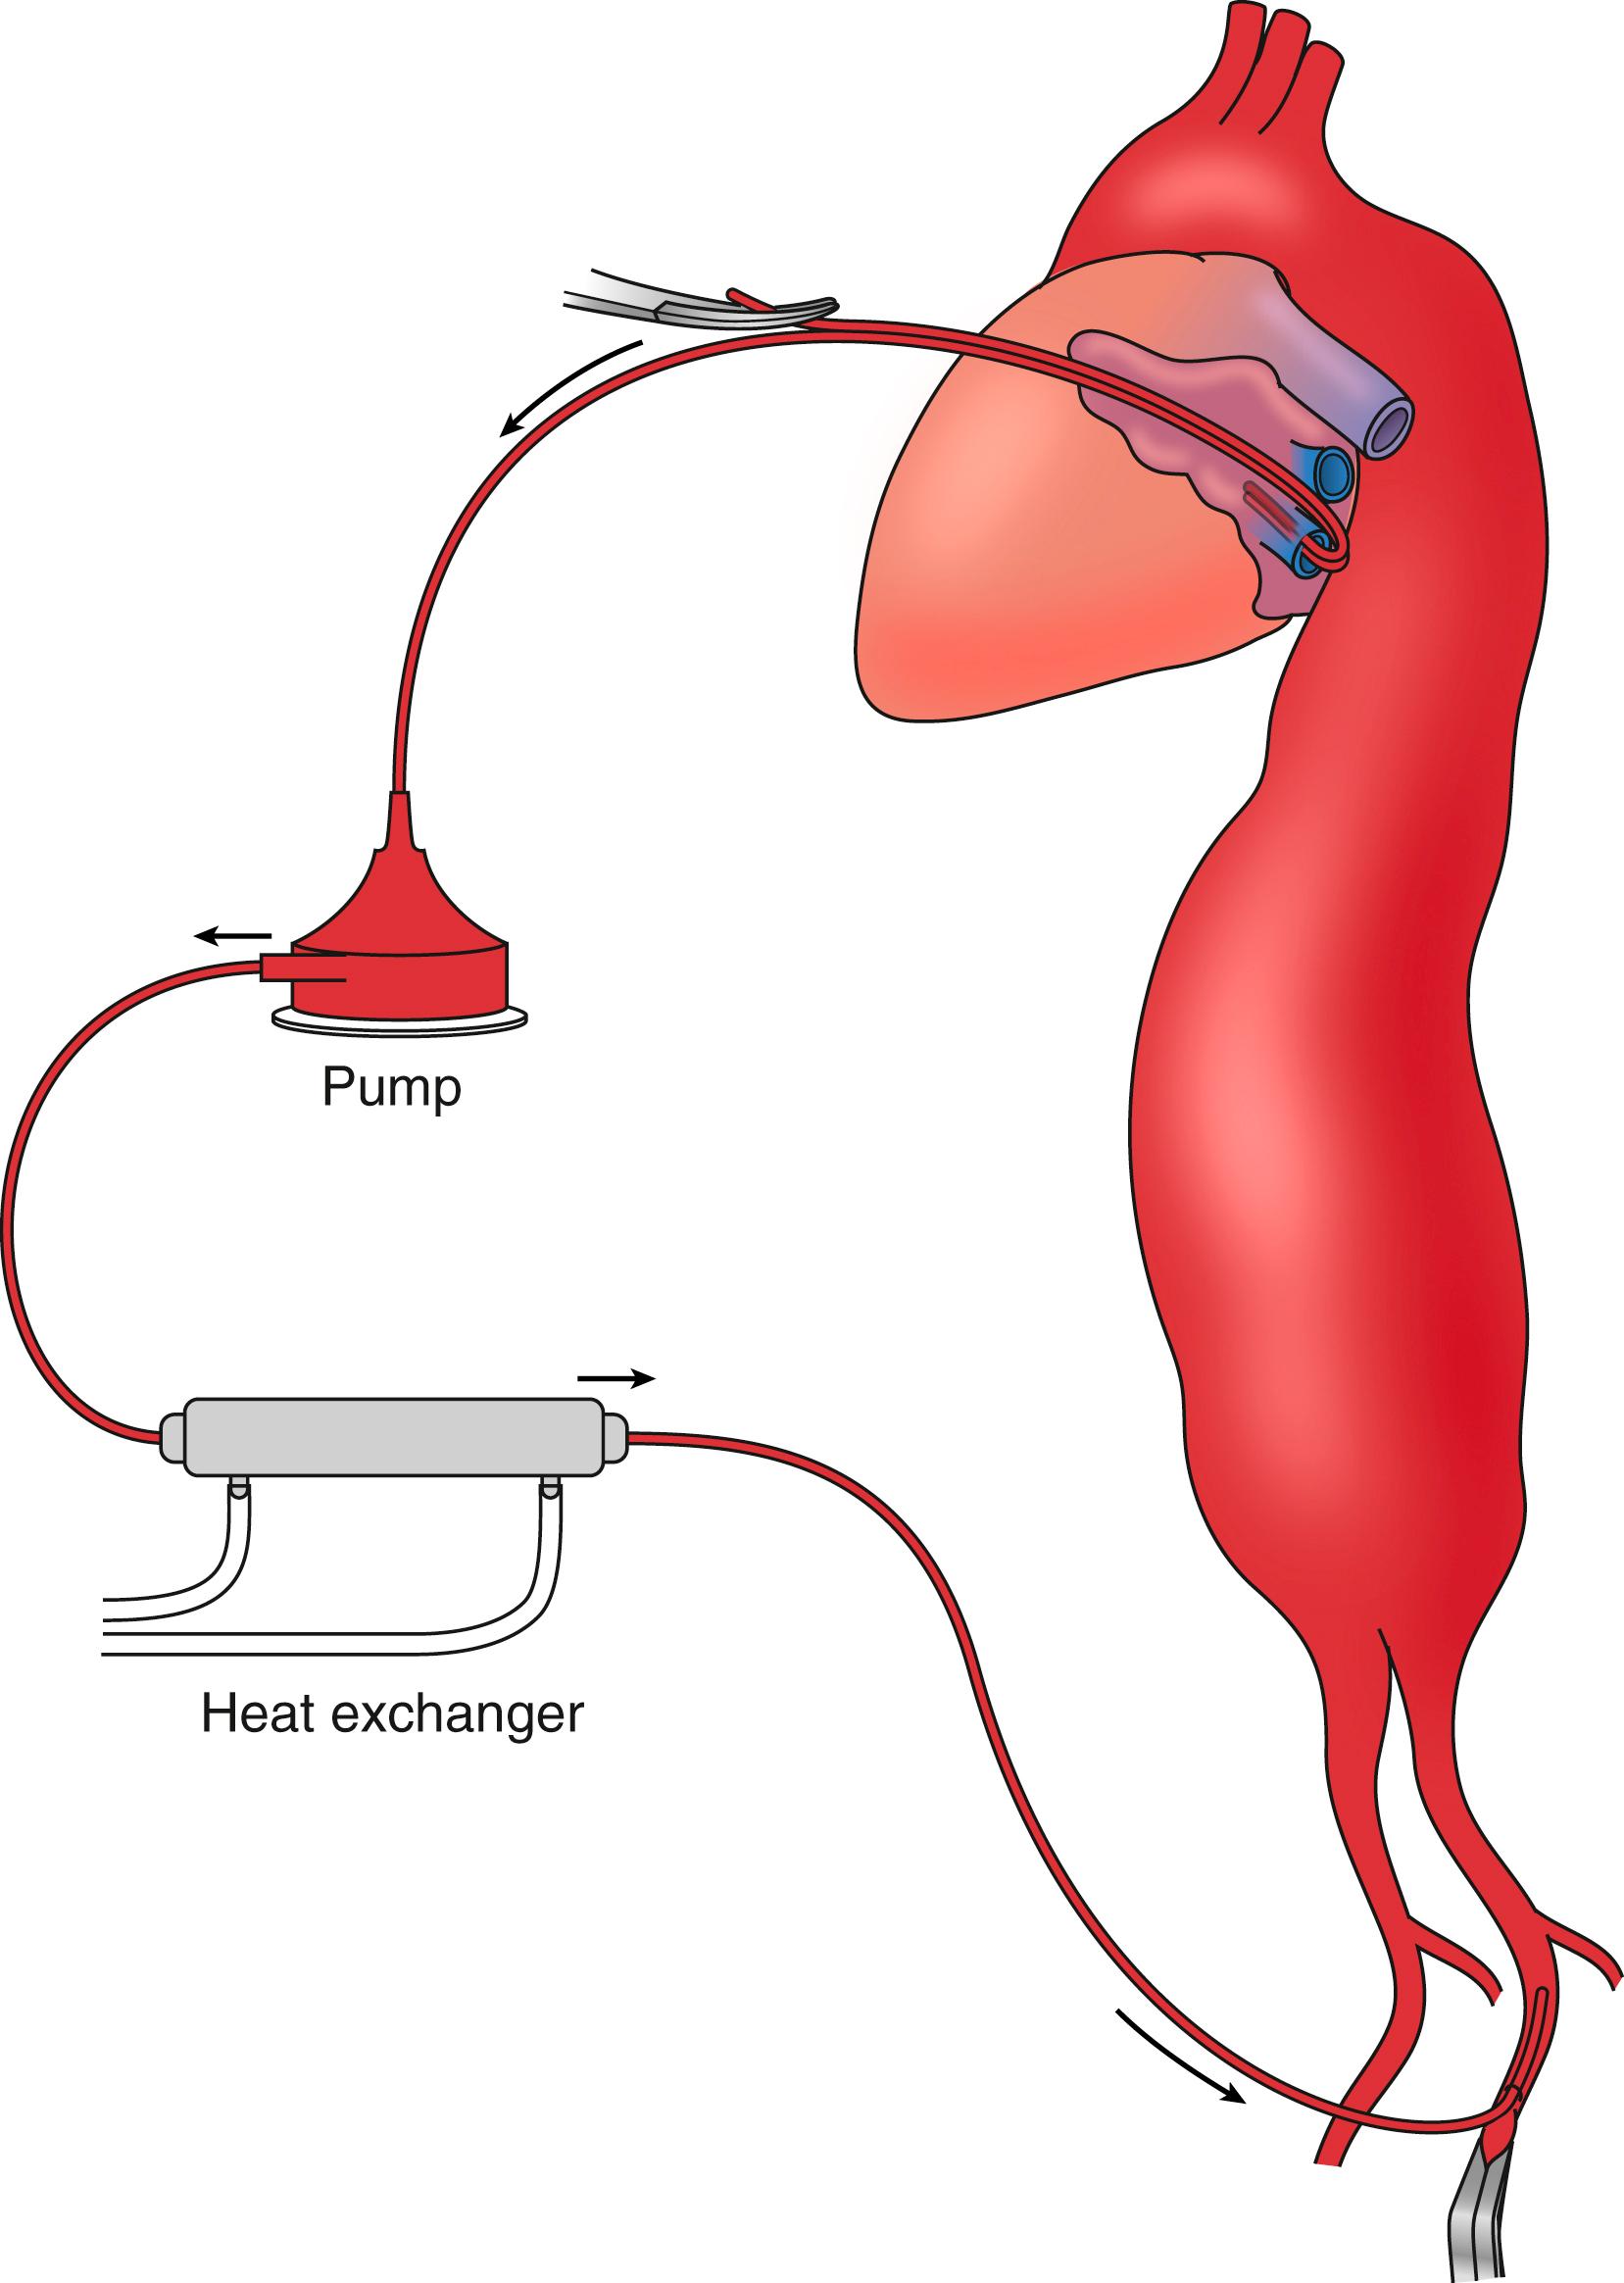 Figure 79.3, Left heart bypass is the most commonly used technique of assisted circulation and is dependent on the lungs for oxygenation and the heart as the primary pump. The circuit is from the left atrium via direct cannulation or through the pulmonary vein to a centrifugal pump back into the arterial circulation (most commonly the femoral artery).